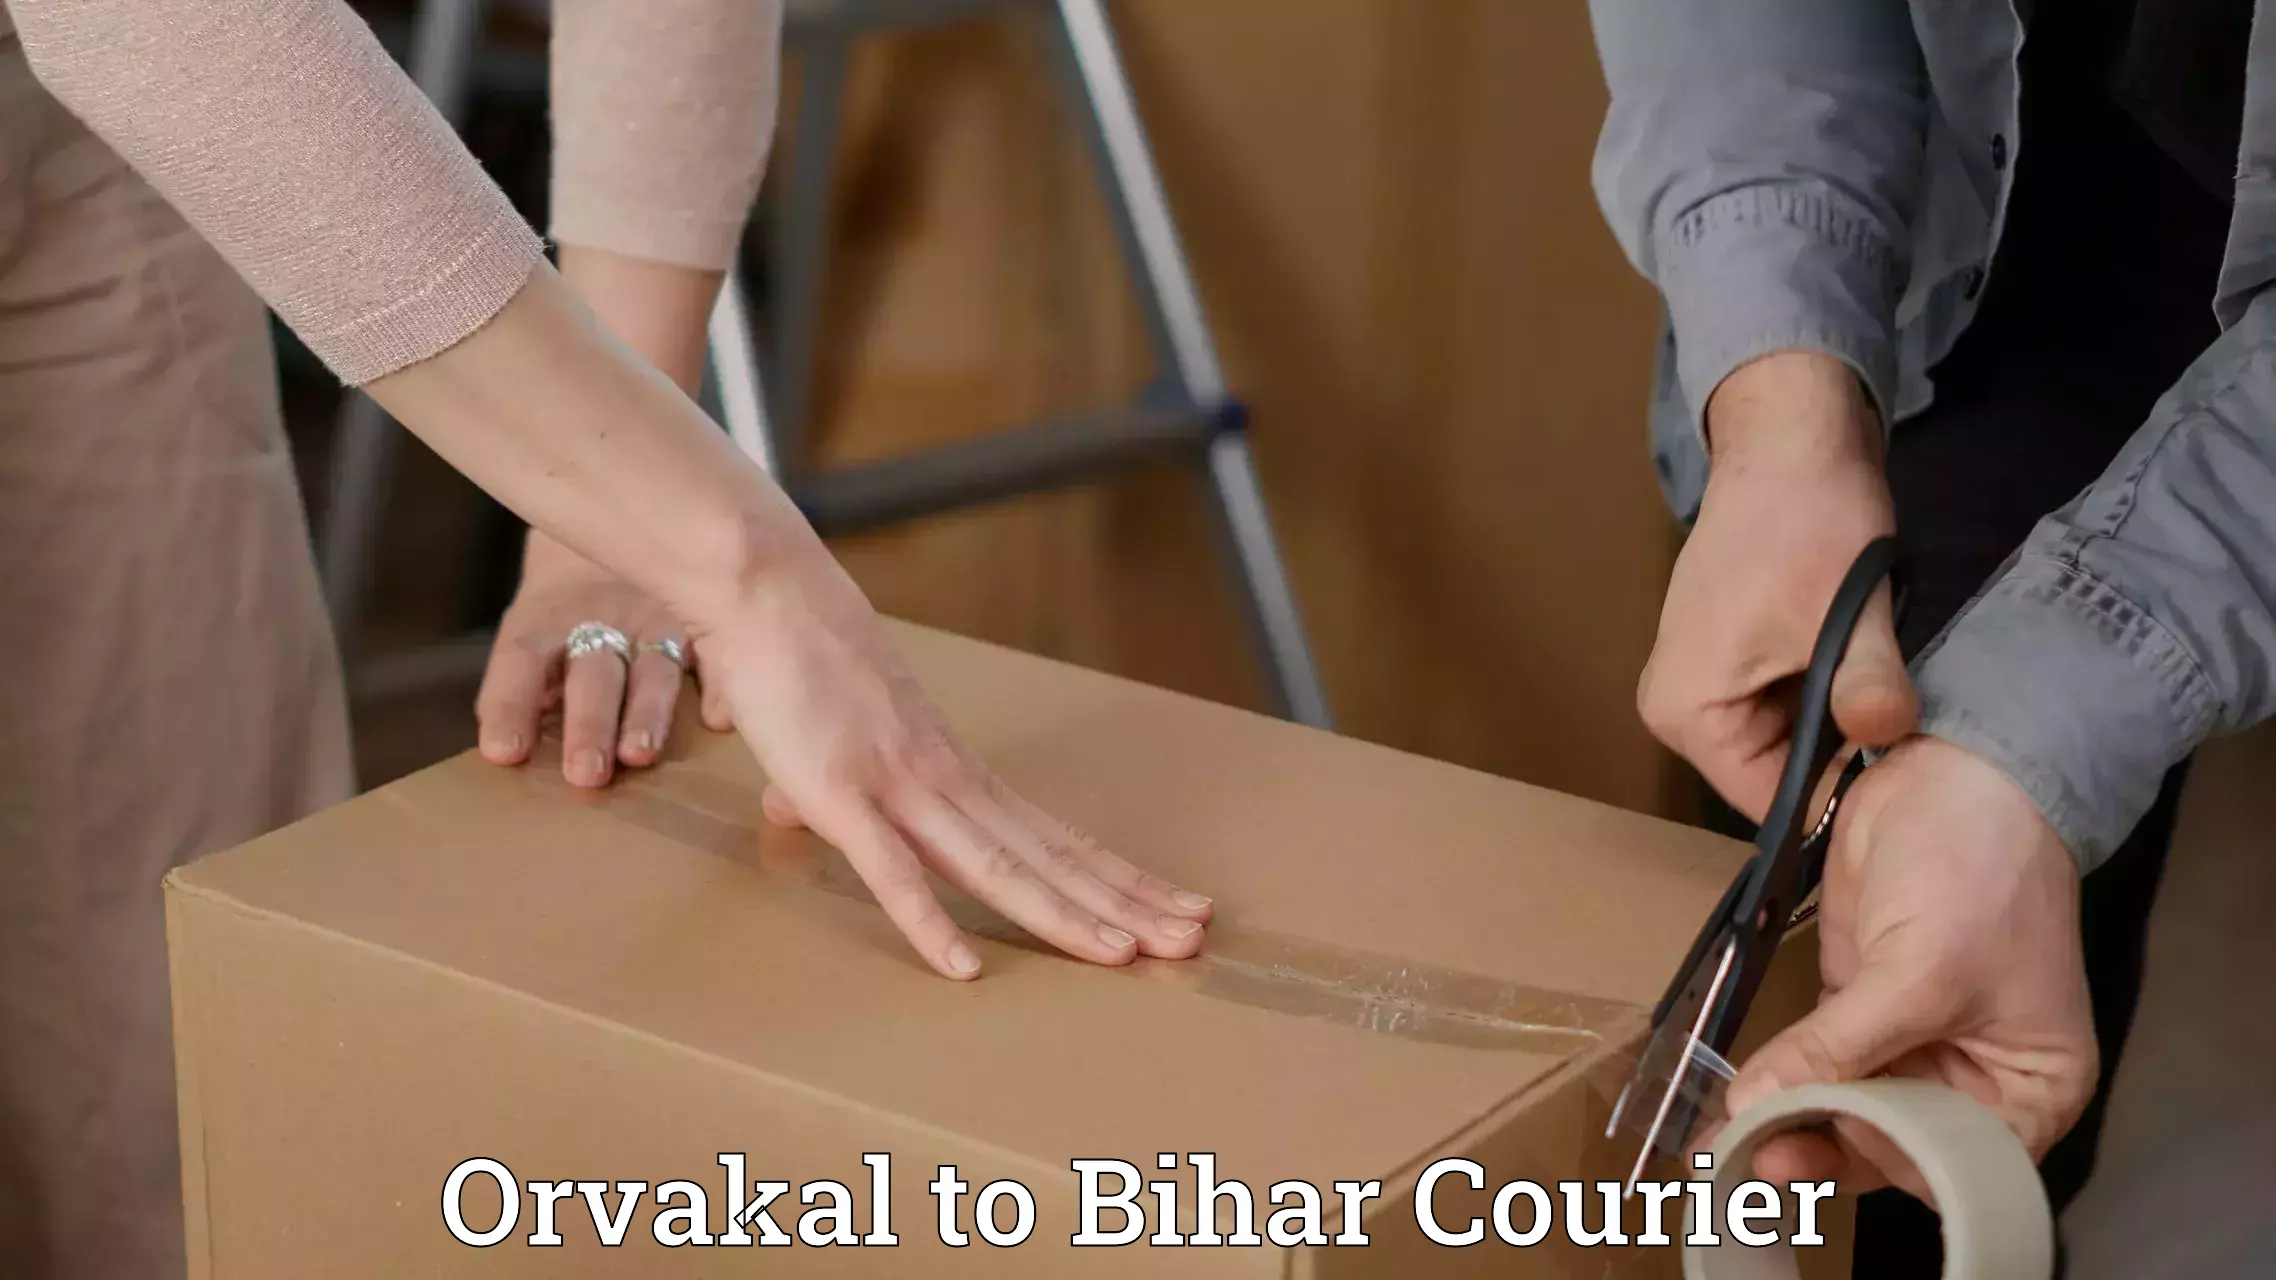 Courier service partnerships Orvakal to Chakai